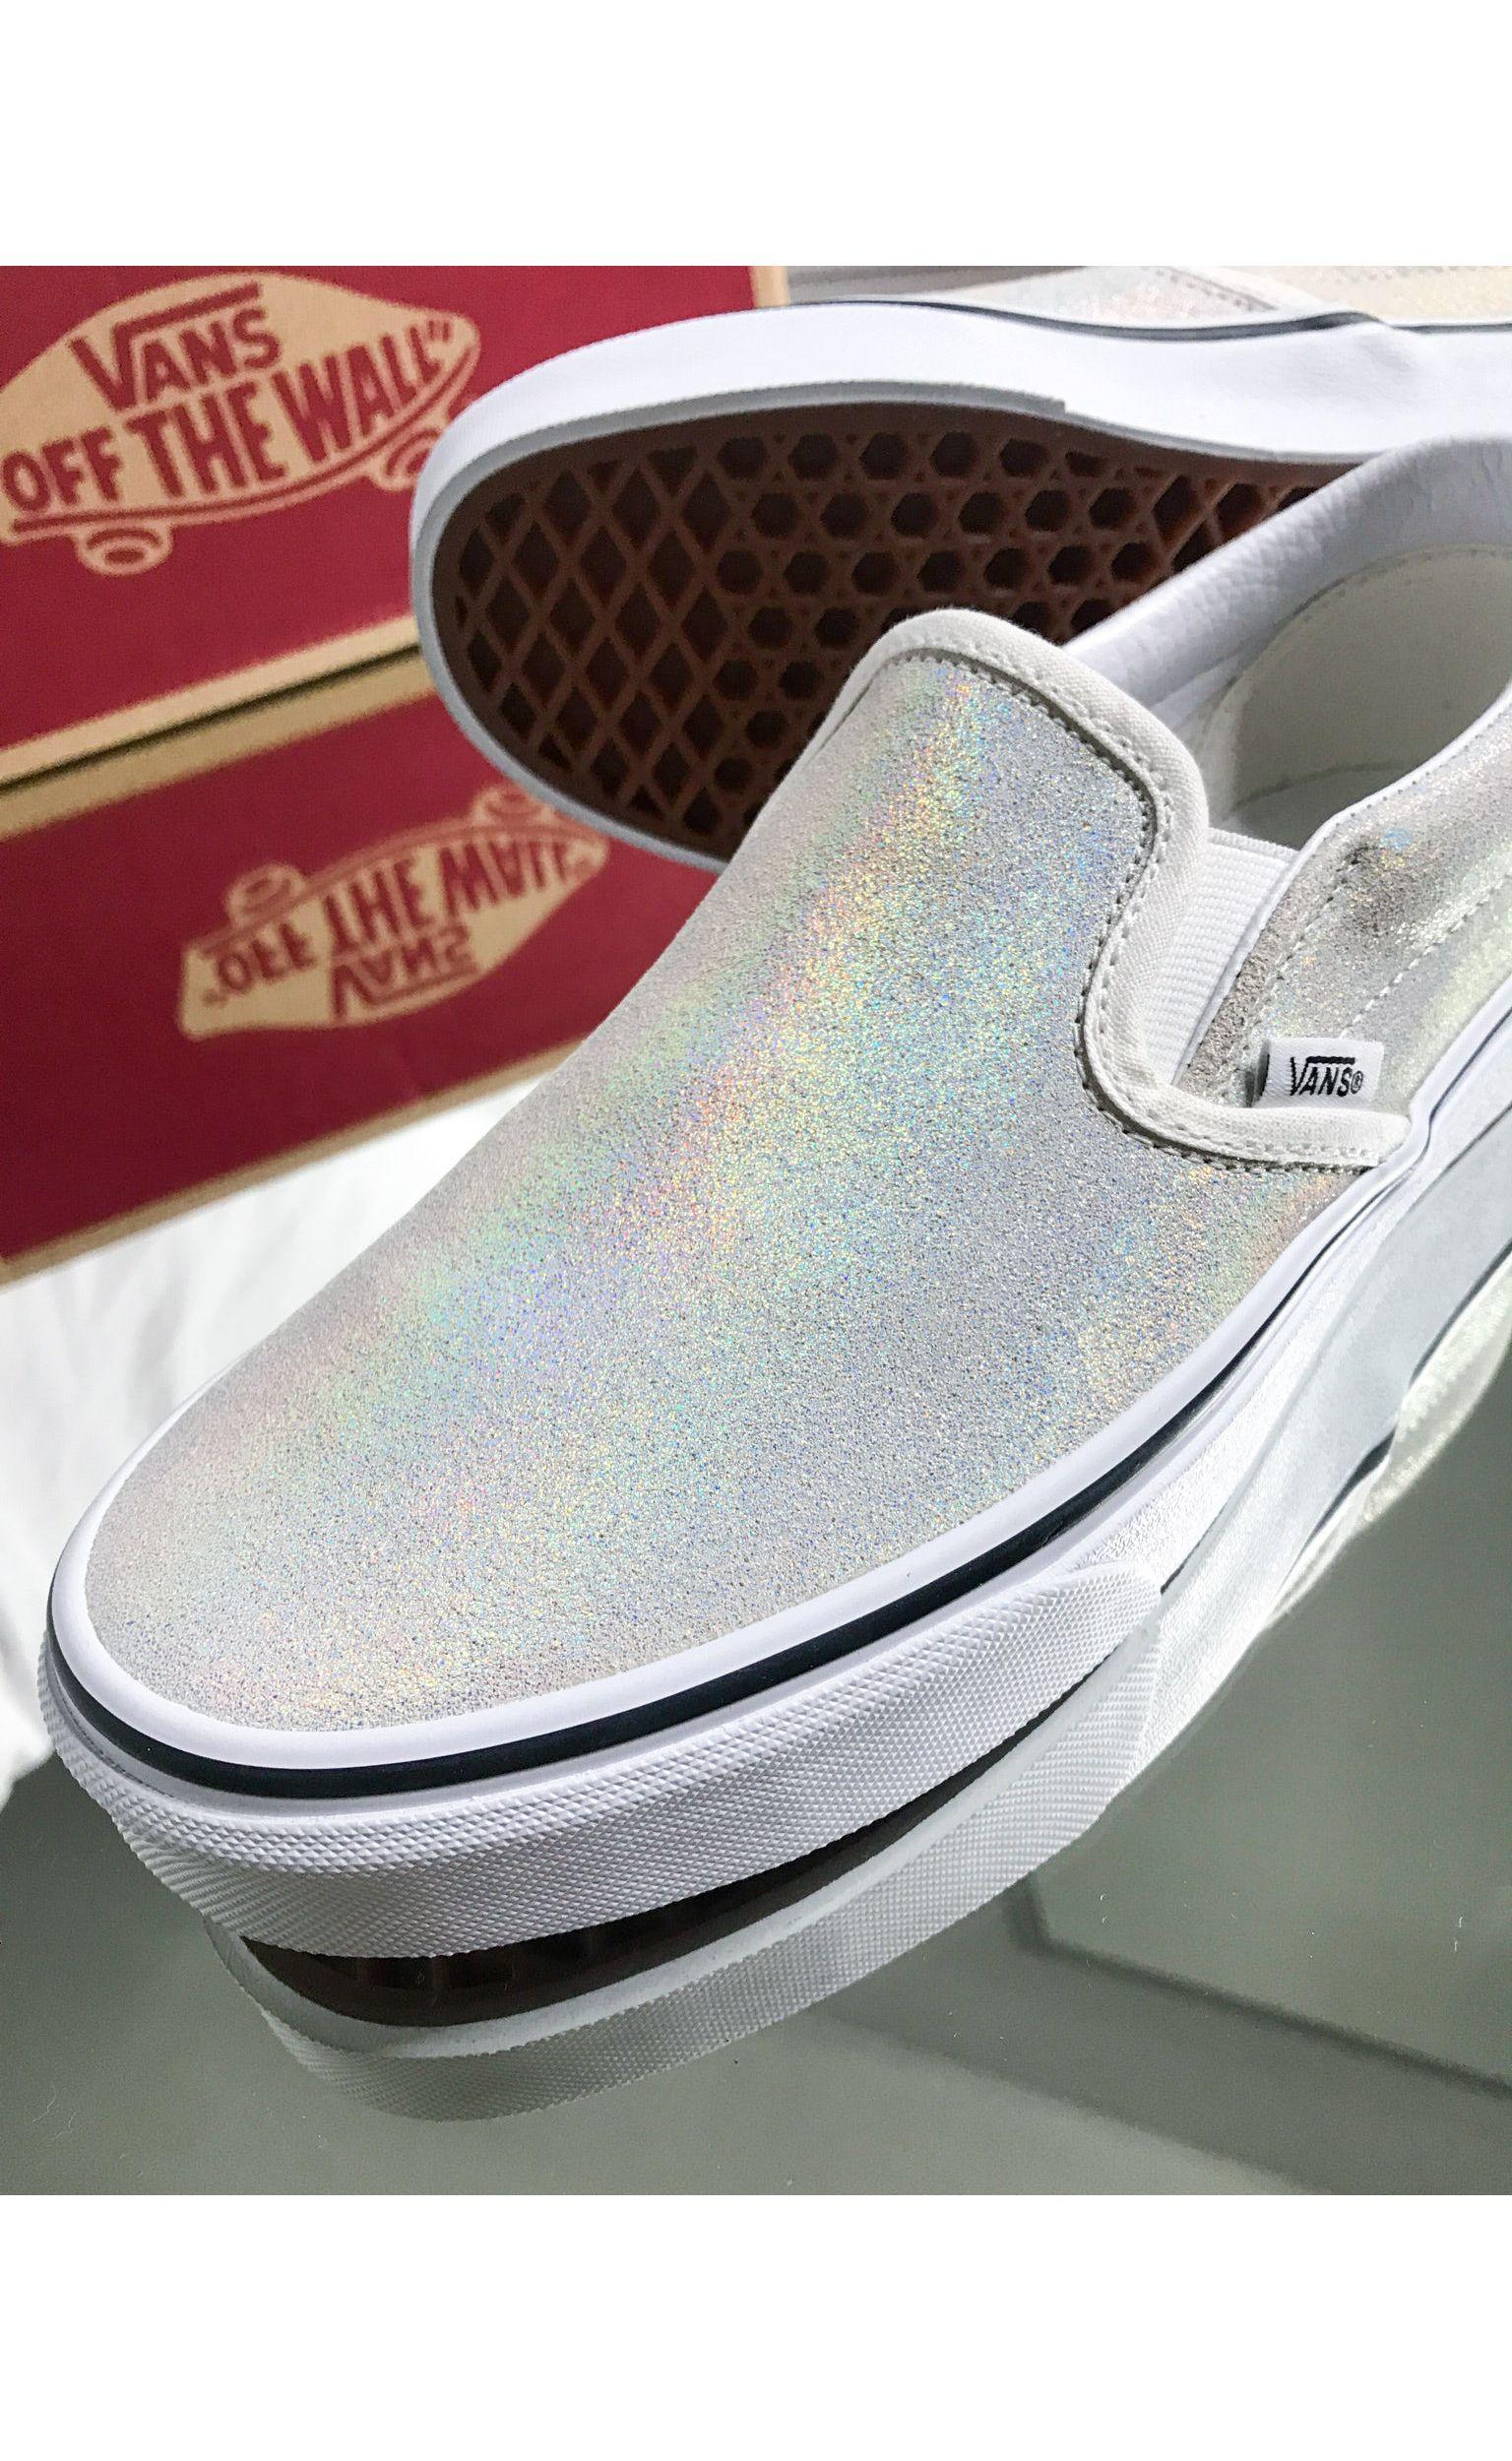 Vans Ua Classic Slip-on Iridescent Suede Trainers in White | Lyst شاحن ايفون اصلي